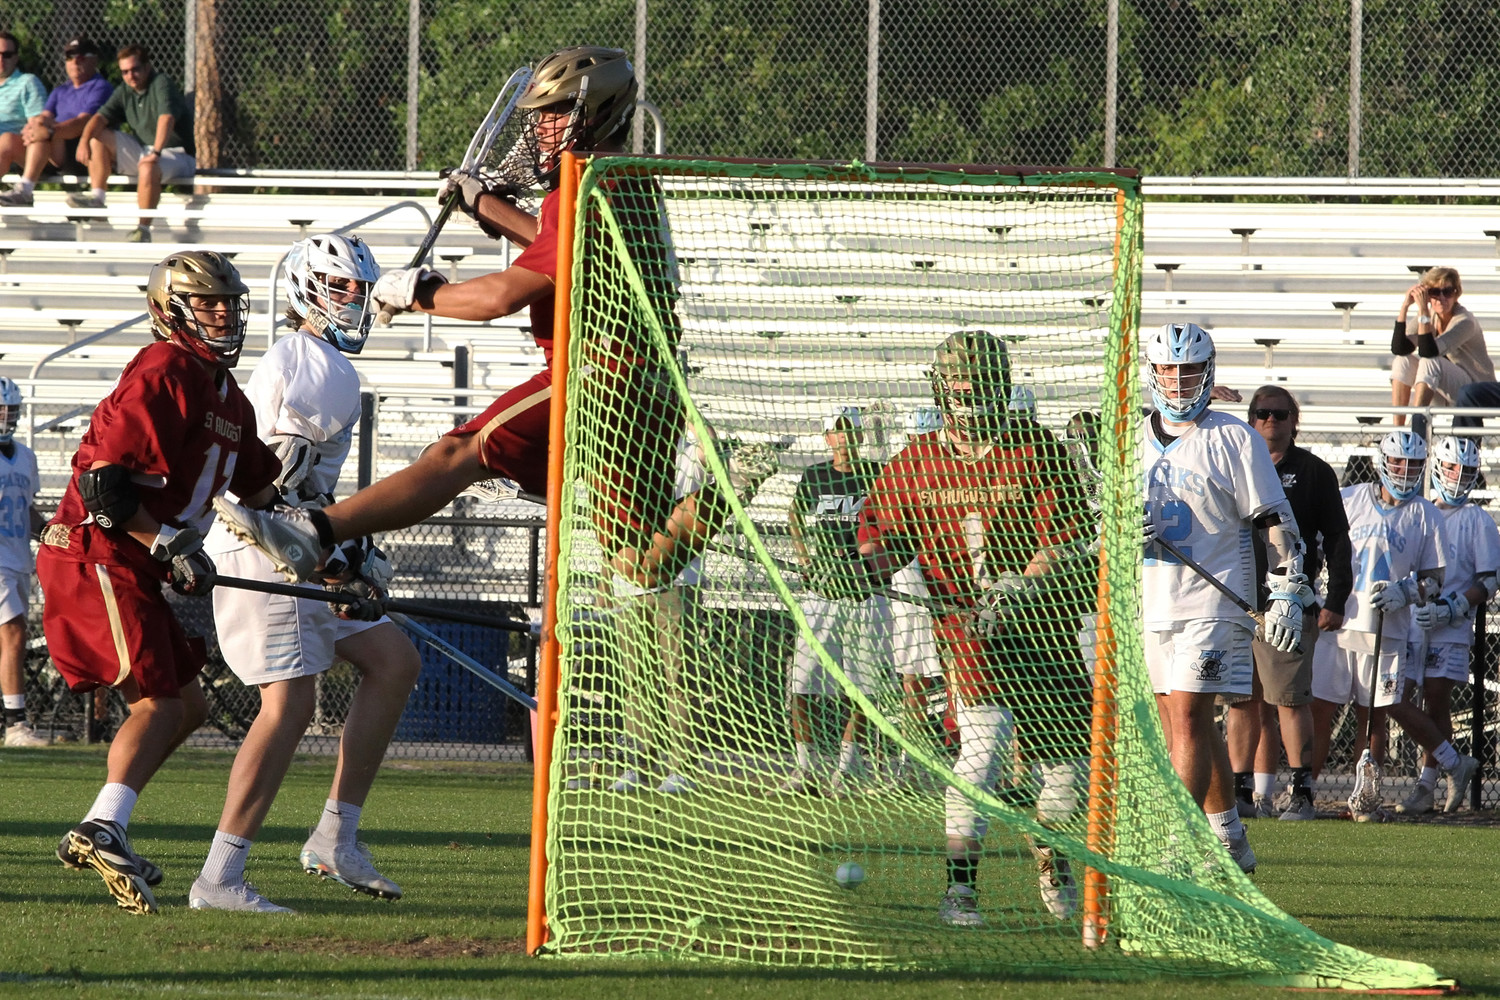 Jack Dowd of Ponte Vedra beats the St. Augustine goalie low as the keeper goes high, attempting to block the shot.